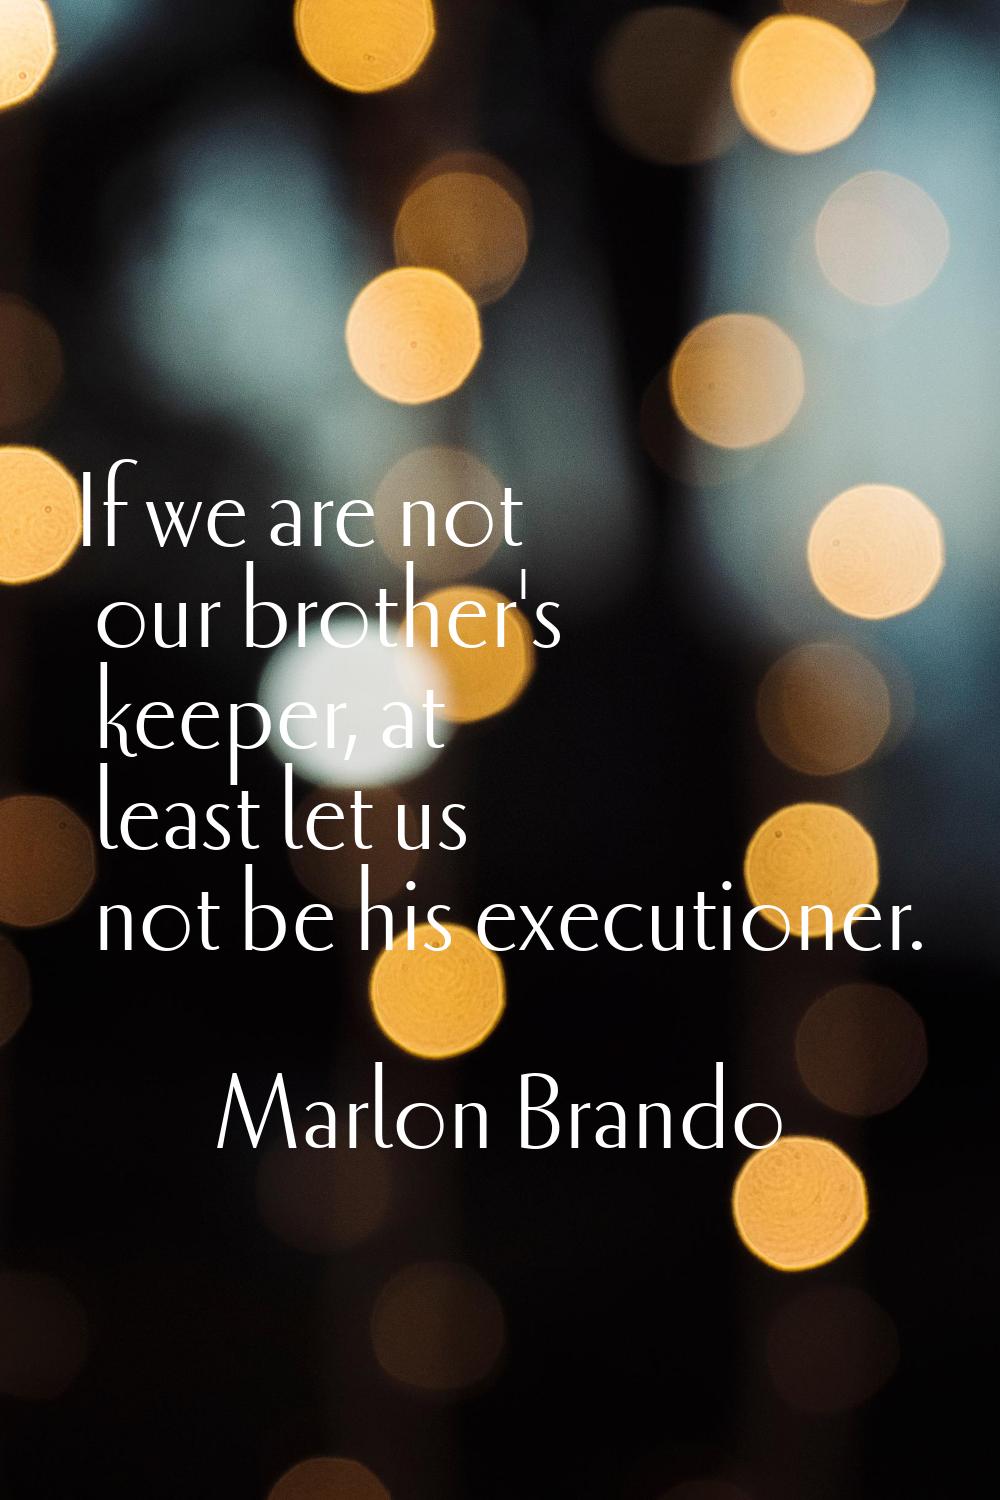 If we are not our brother's keeper, at least let us not be his executioner.